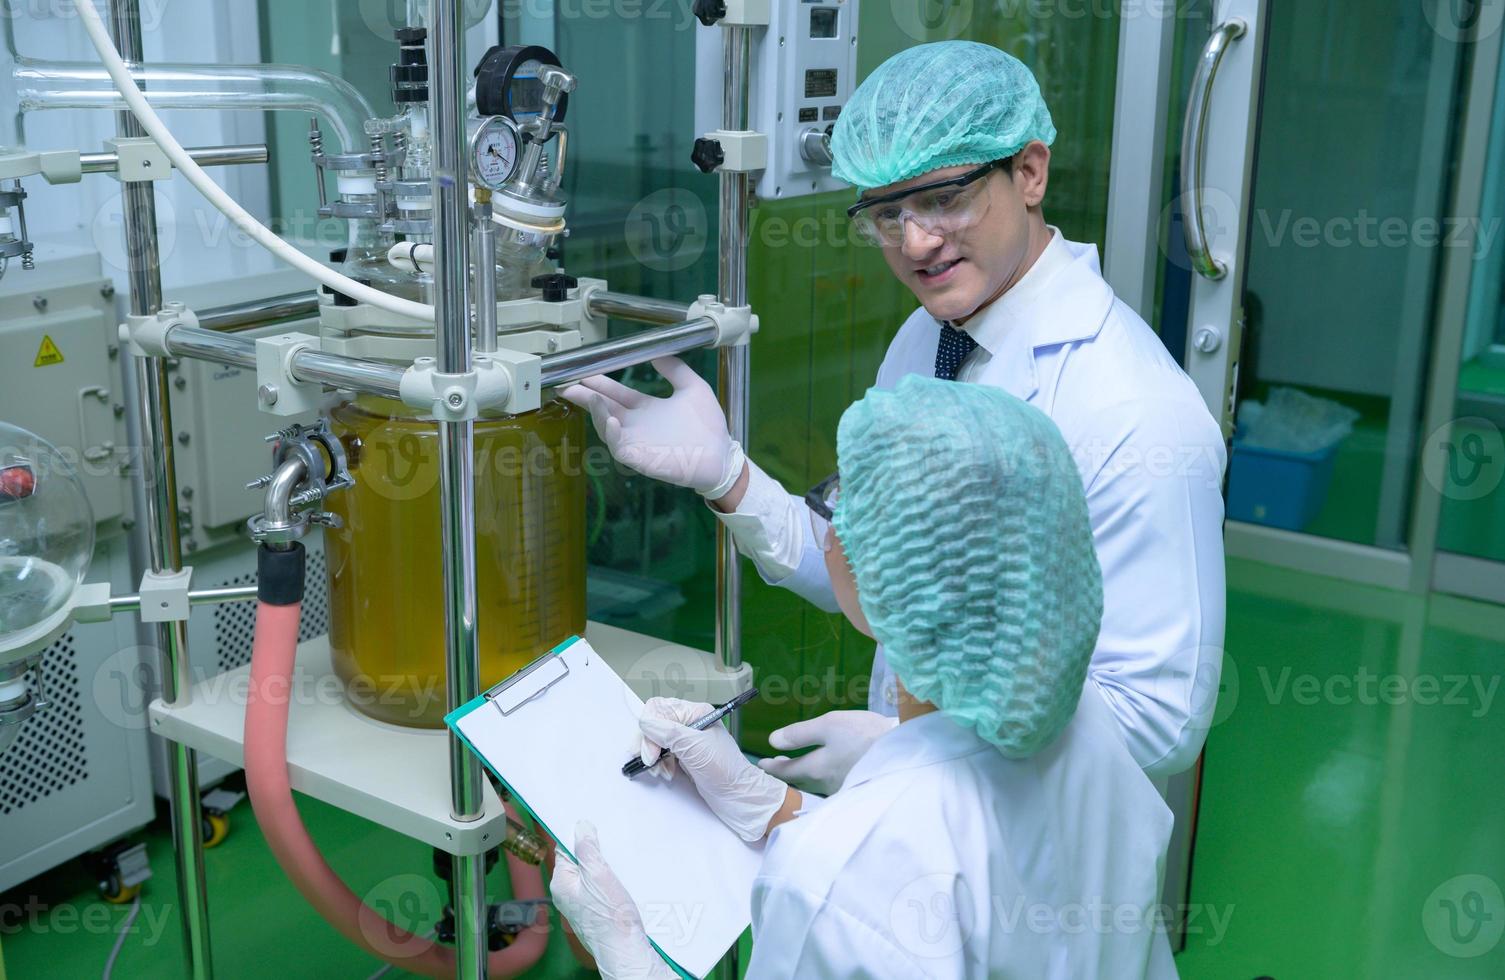 Scientists and assistants are in the machine room extracting oil and cannabis seeds. Inspecting cannabis oil extractor before starting to extract the prepared cannabis photo